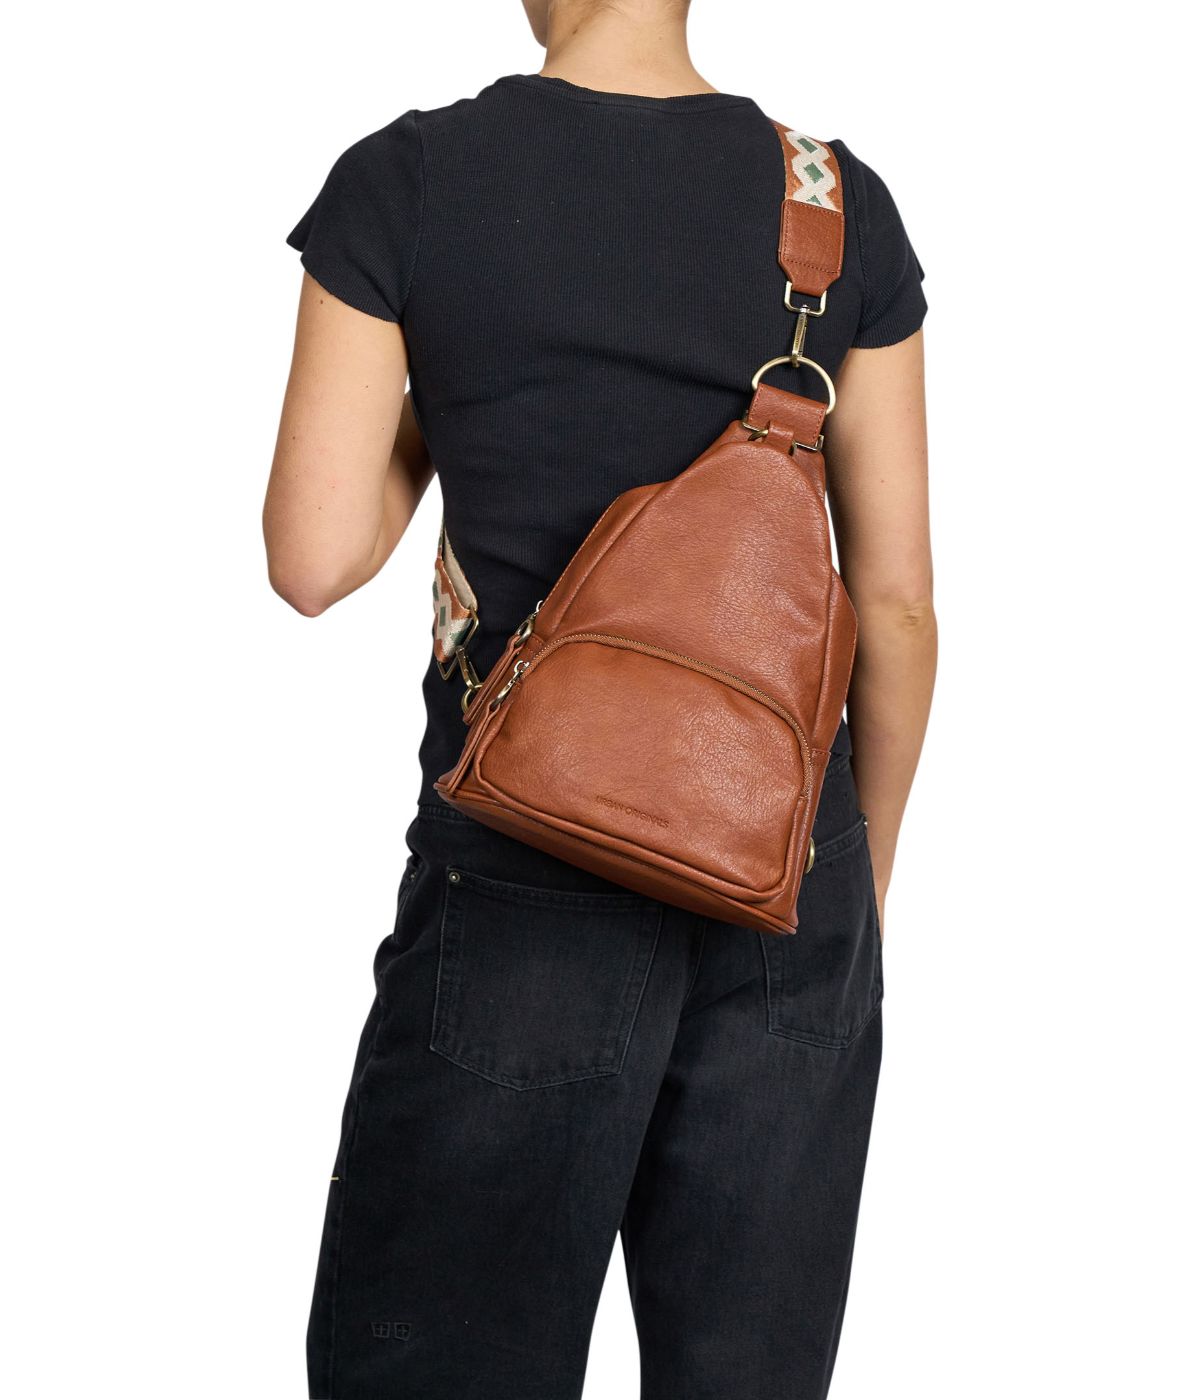 Anything Goes Crossbody Bags Chocolate